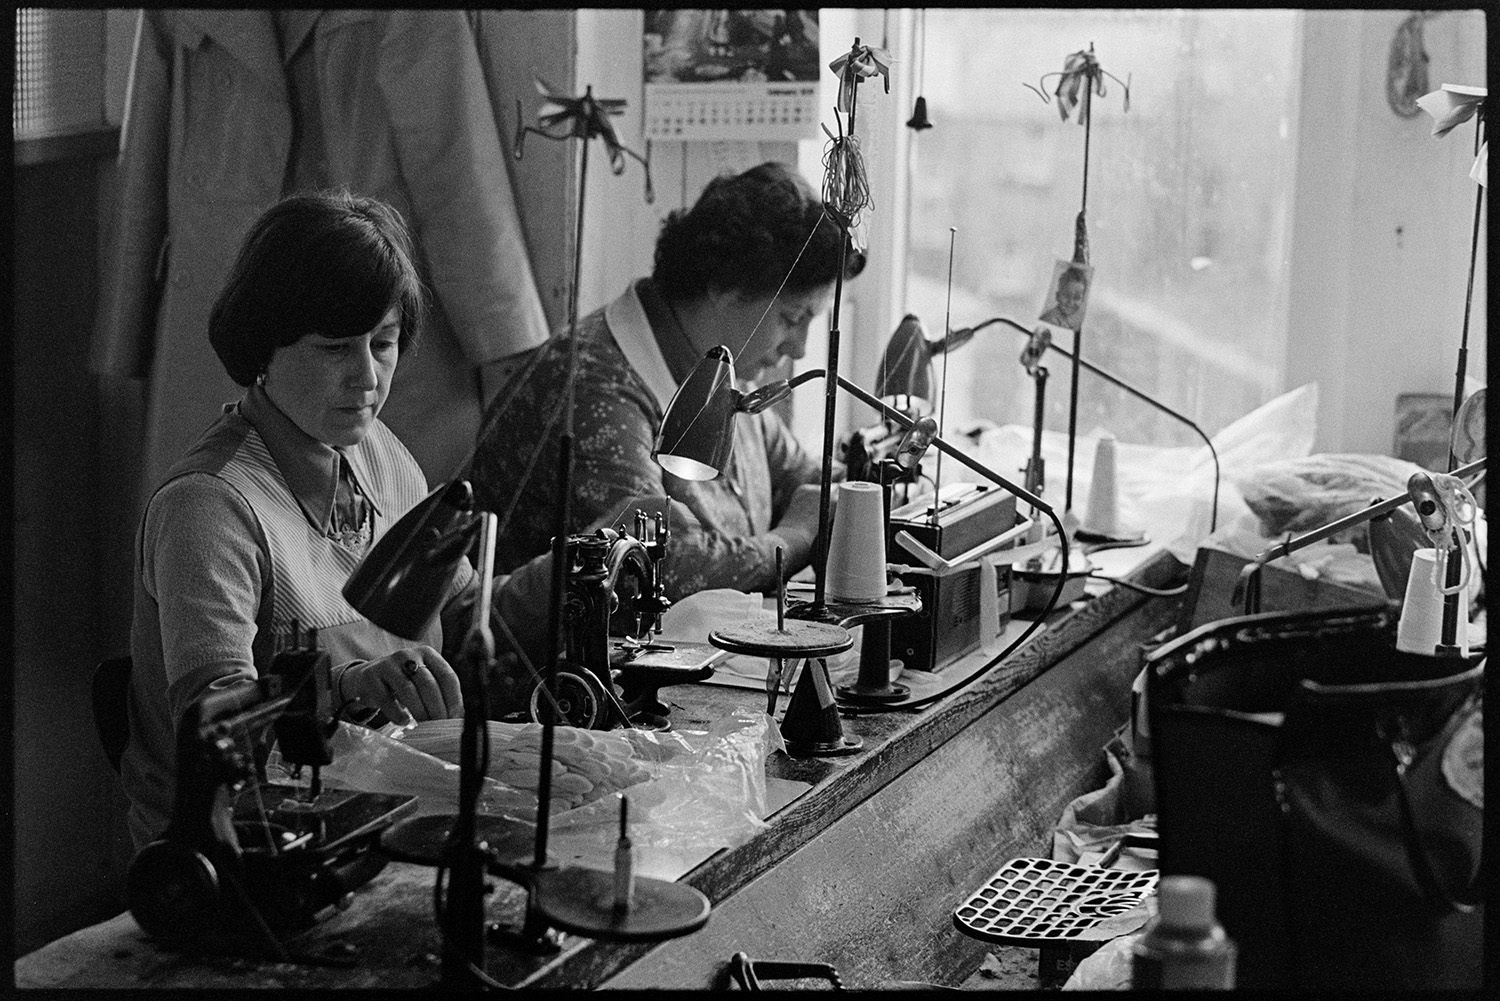 Glove factory. Women at factory machines. Woman clerk filling in ledger.
[Two women seated at sewing machines making gloves at Vaughans Glove Factory, Halsdon Terrace, Torrington.]